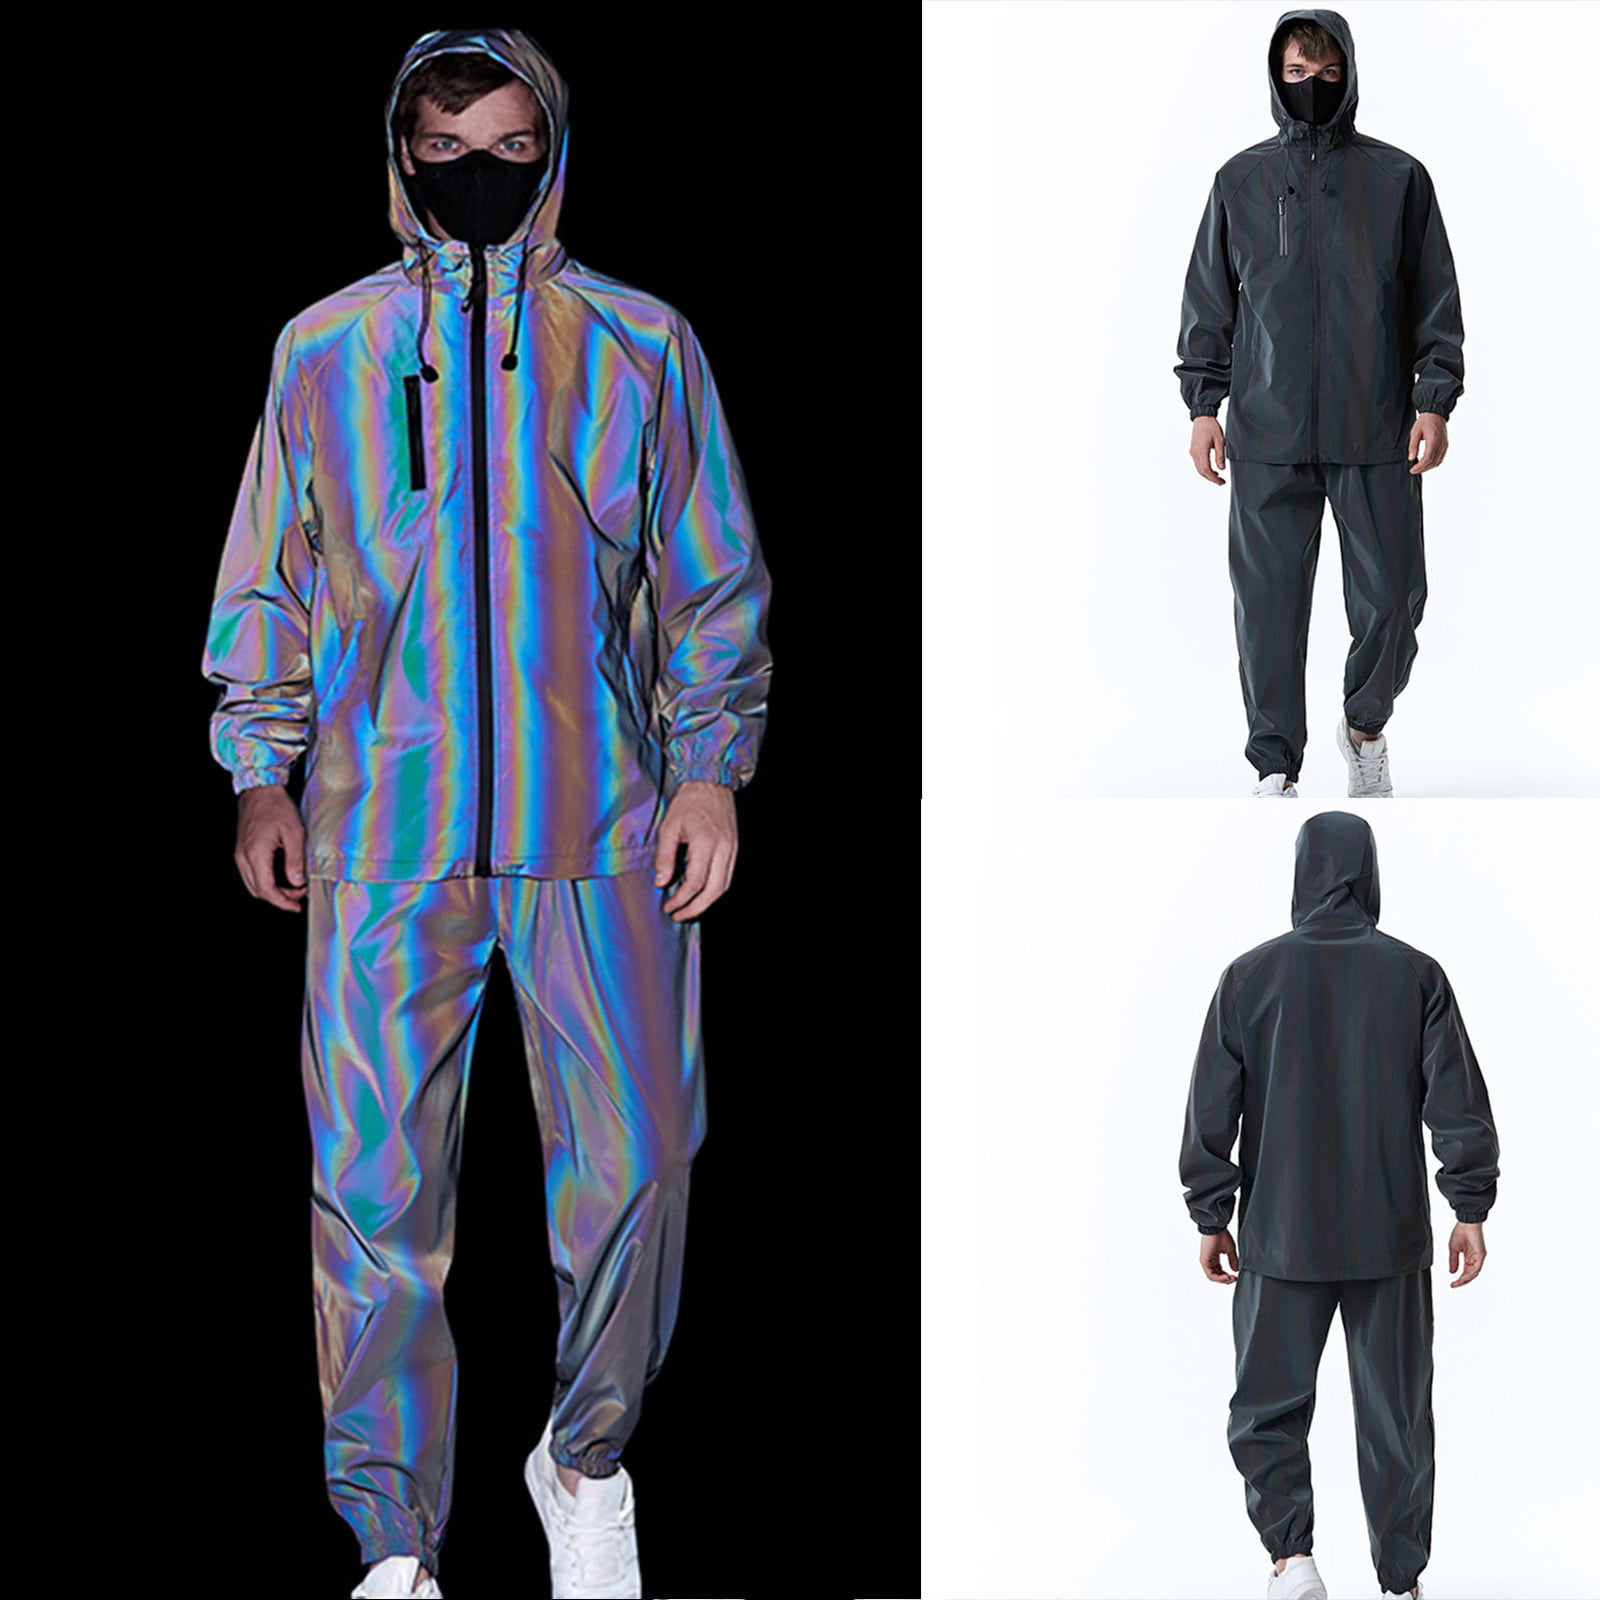 Mens 2 Piece Outfit Reflective Jacket Casual Hiphop Windbreaker Night  Sporting Hooded Coat and Fluorescent Pants